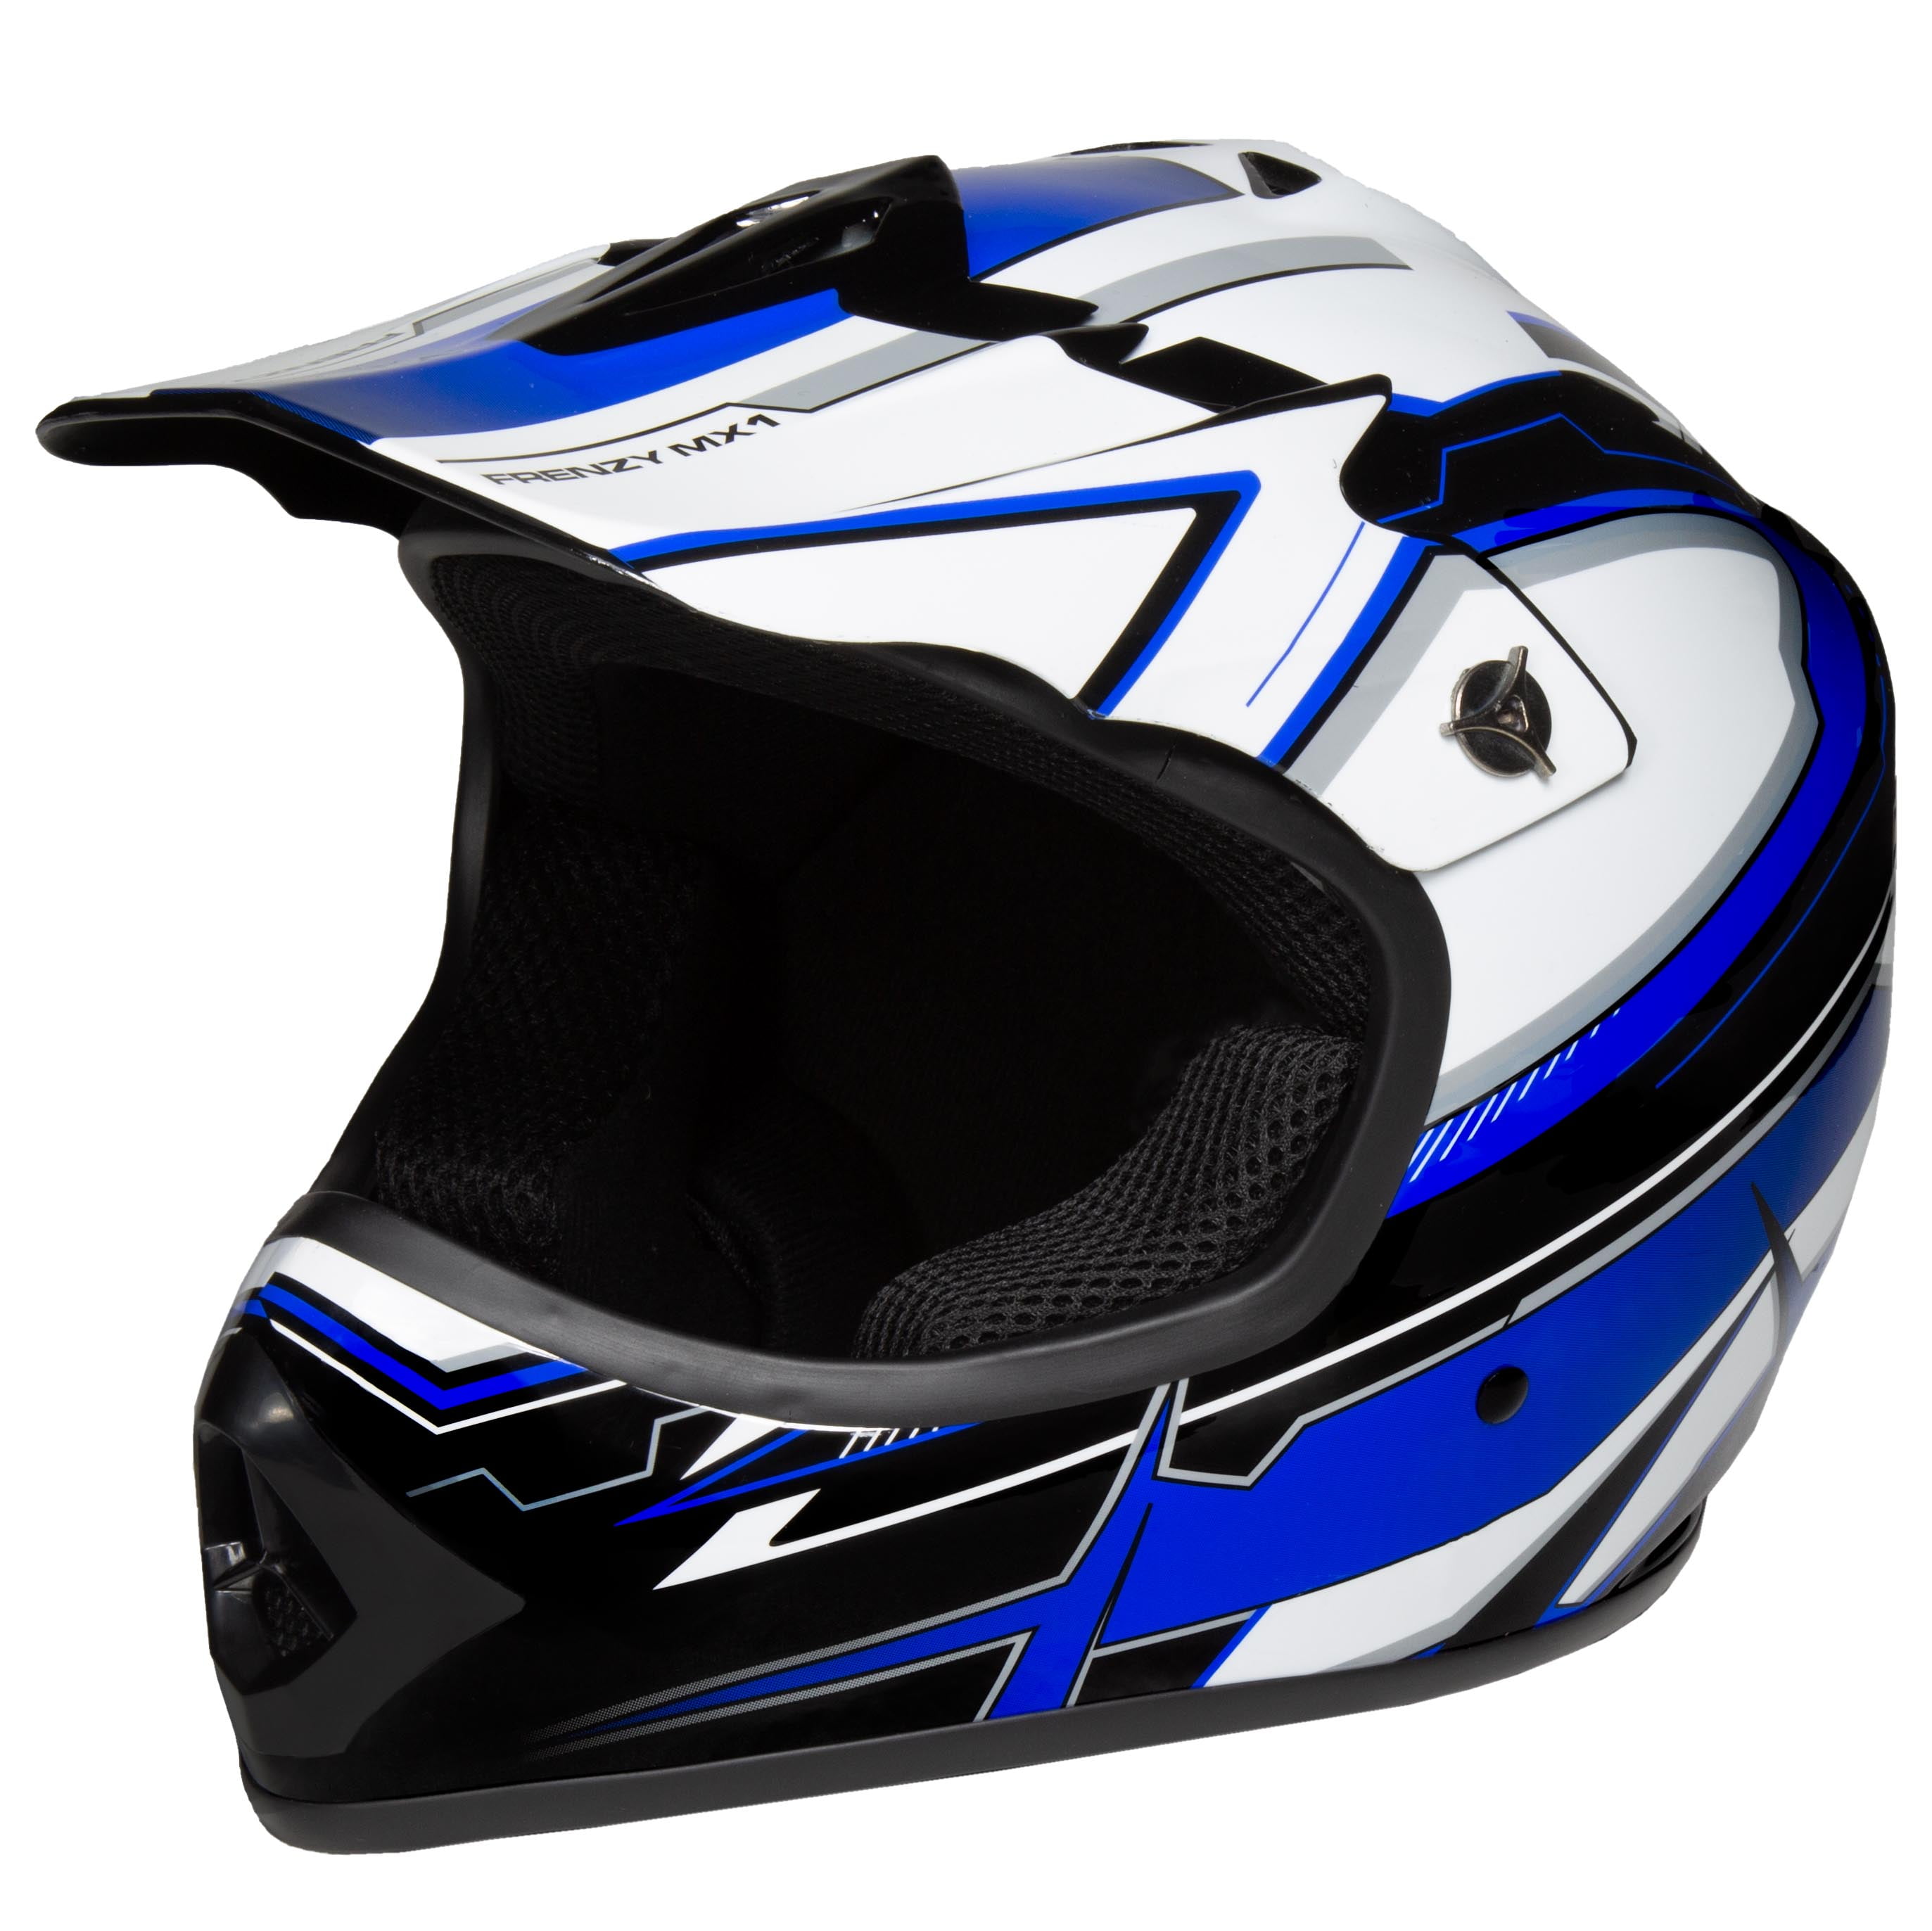 Trials MX Motorcycle Helmet ATV Quad Off Road Adult With 2 Visors Clear & Tinted 